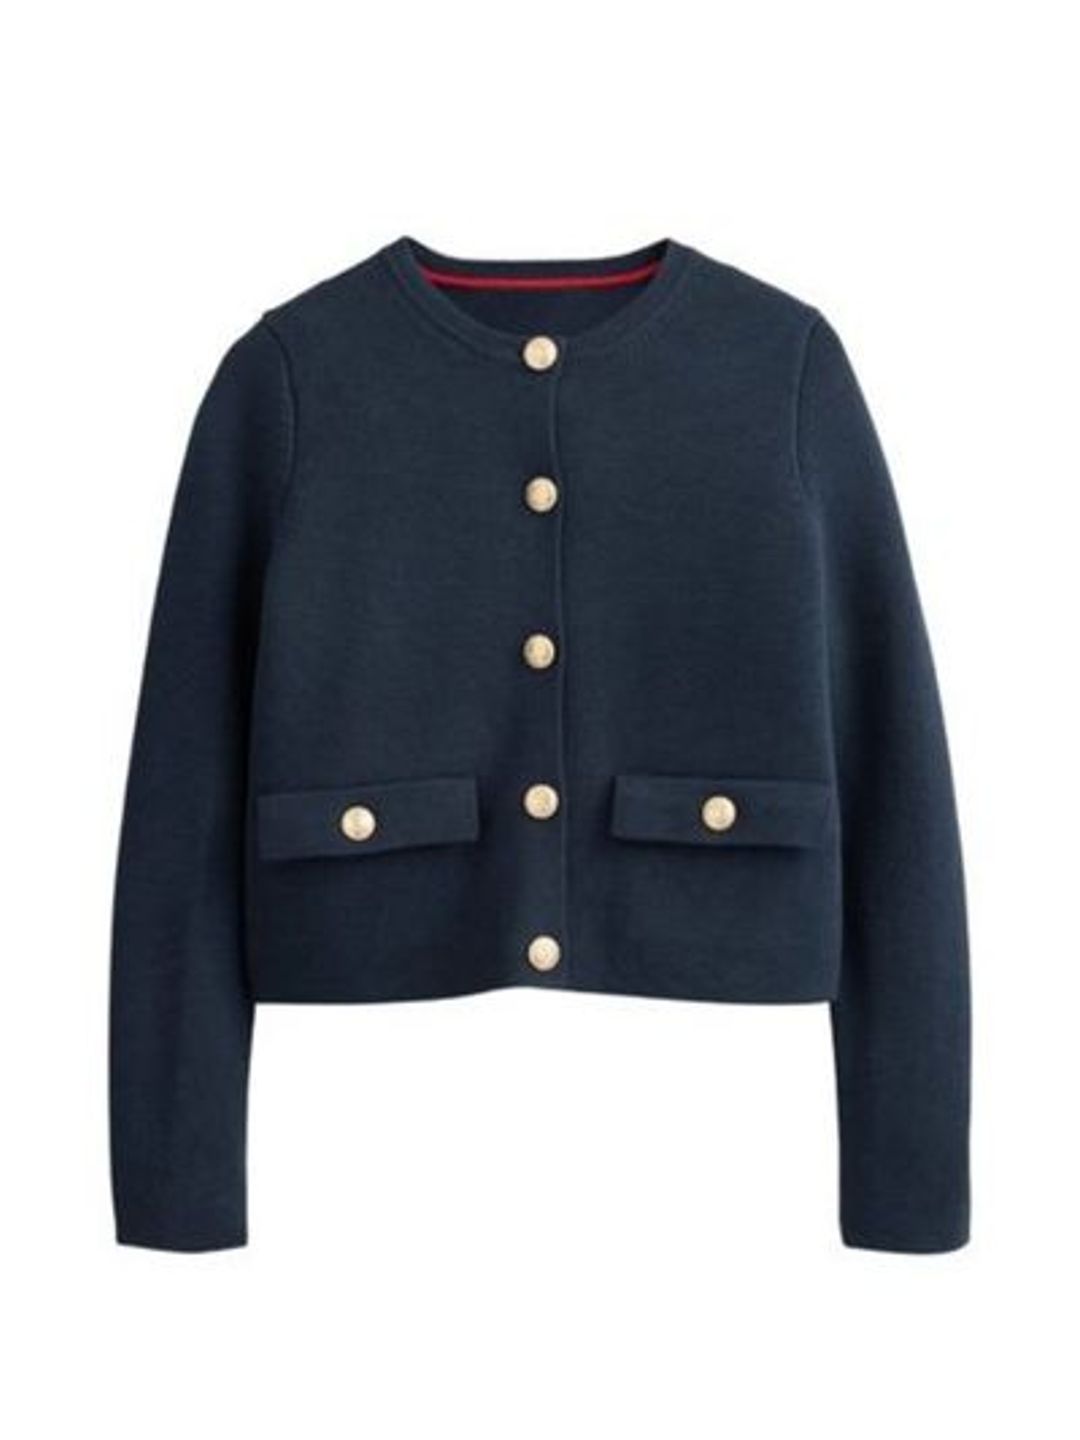 Boden cropped knitted jacket 